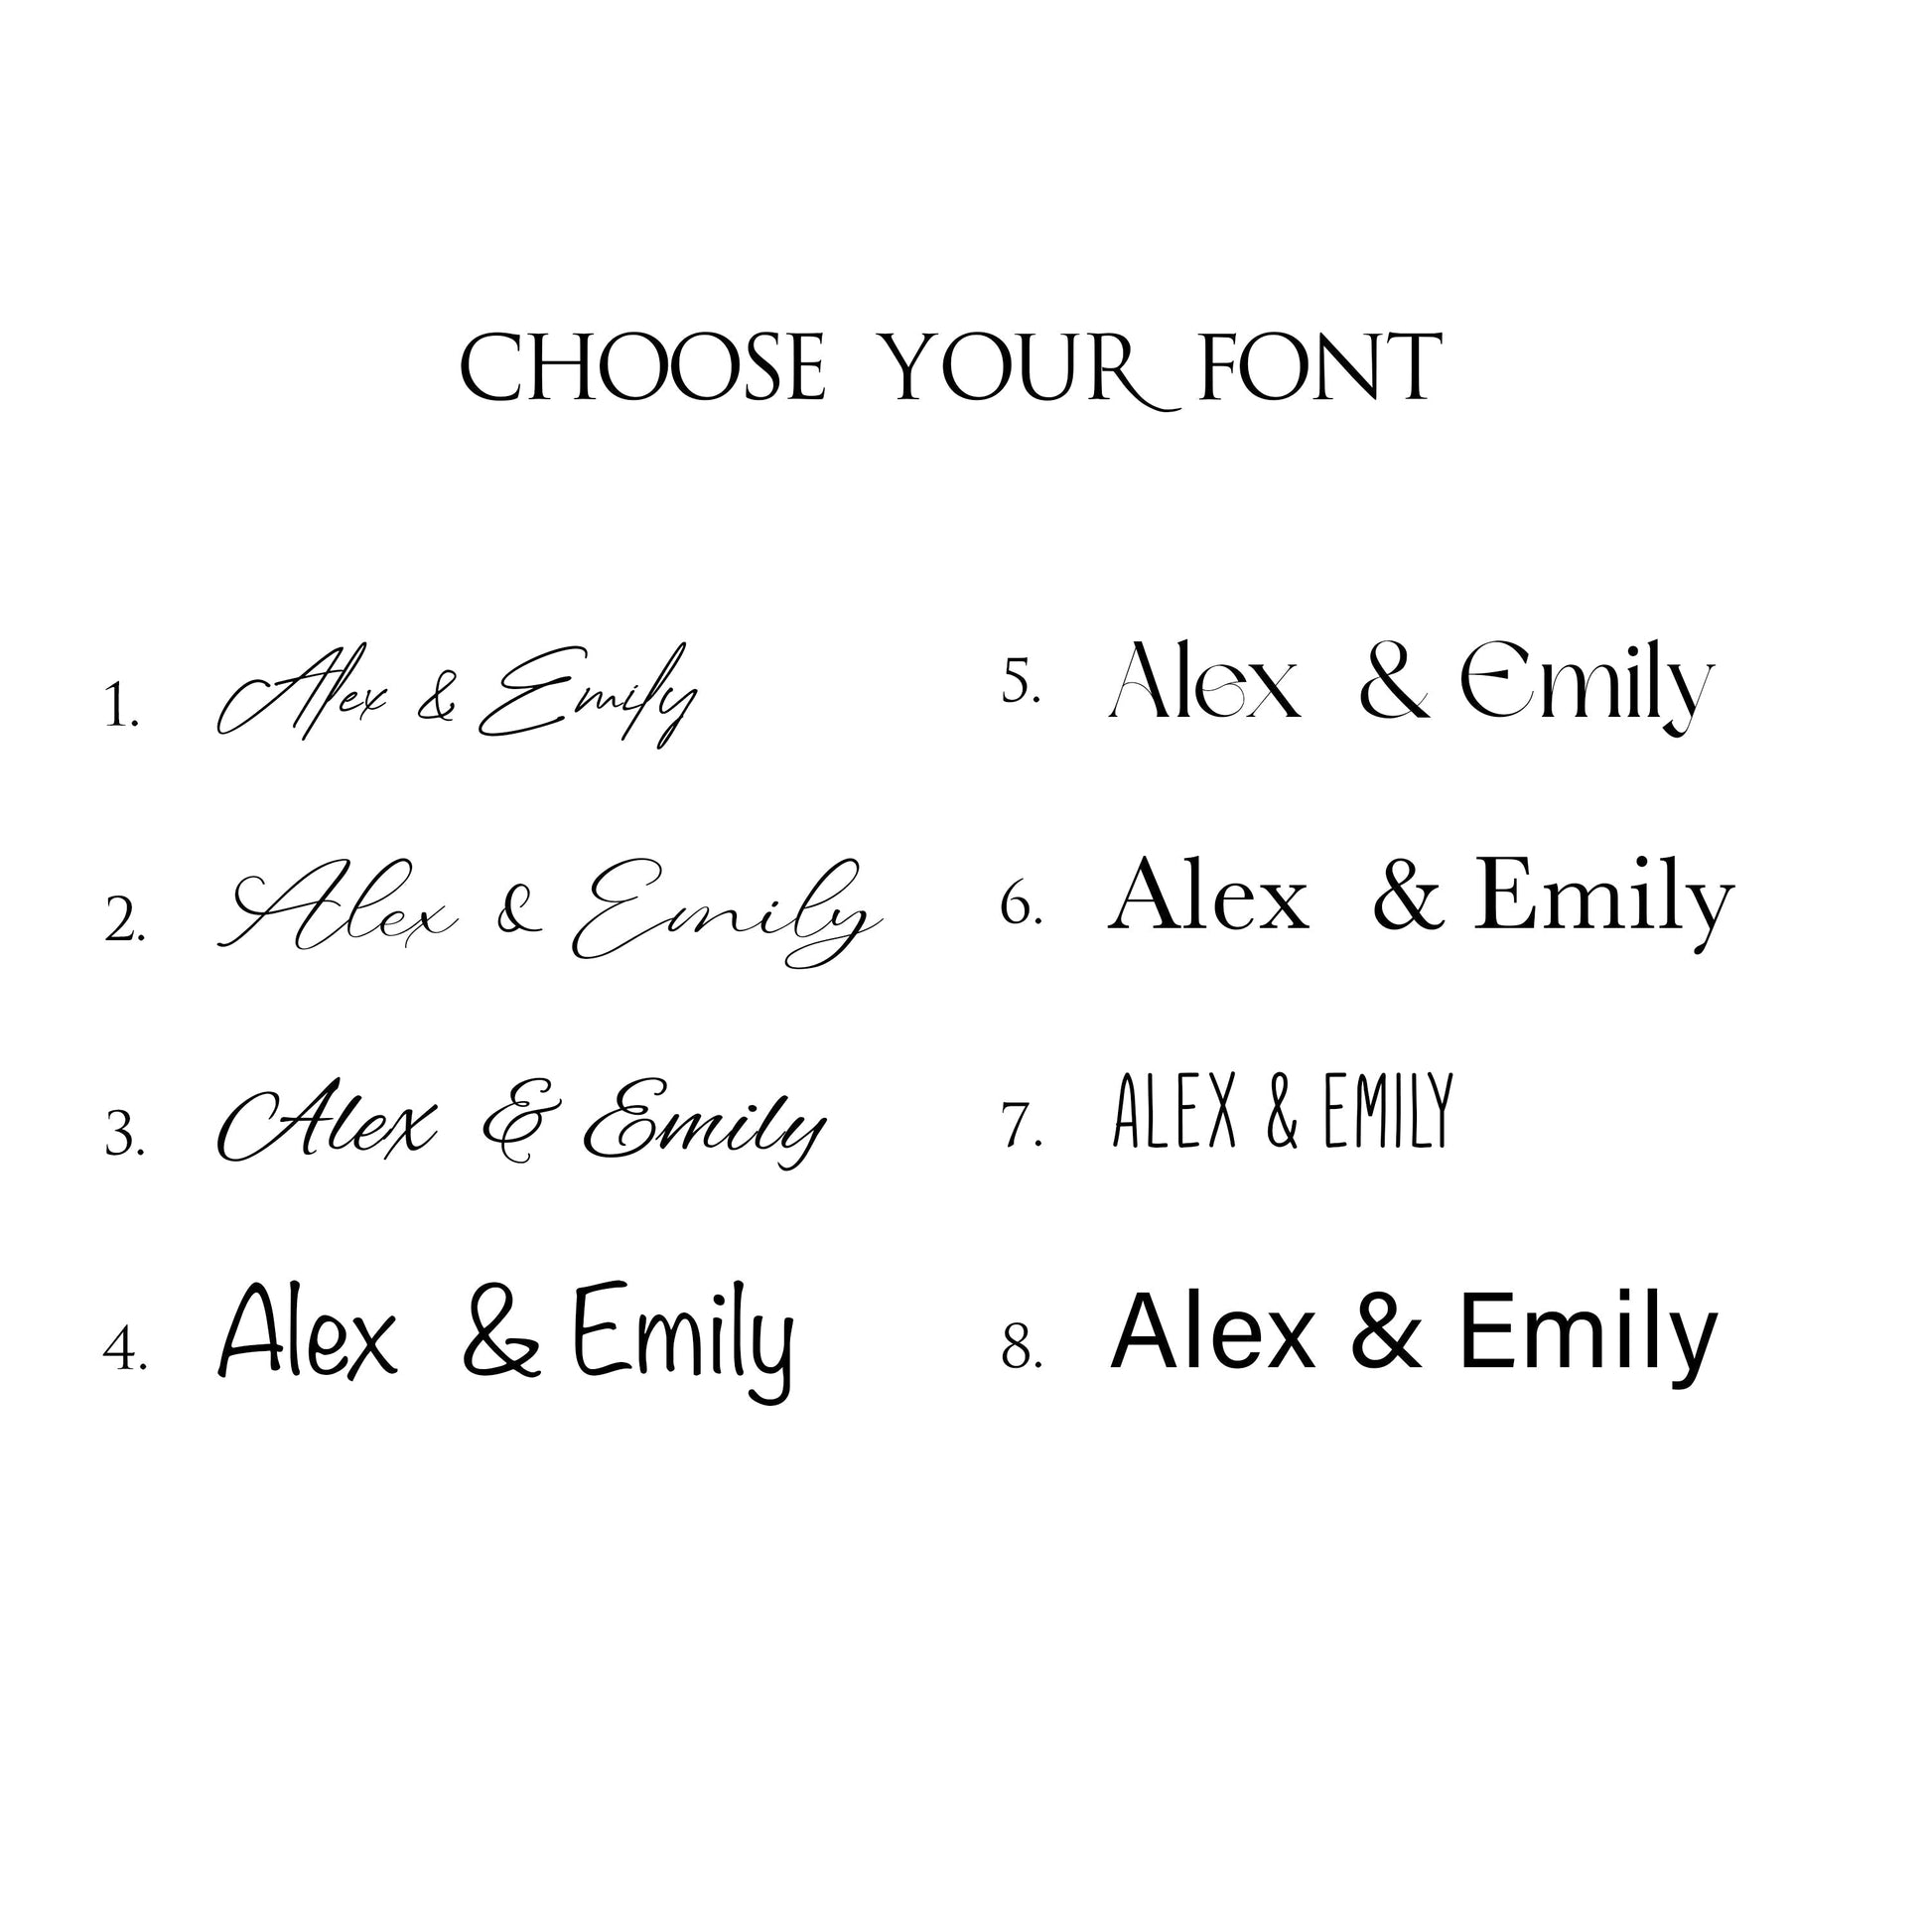 Select your preferred font style from the available options.